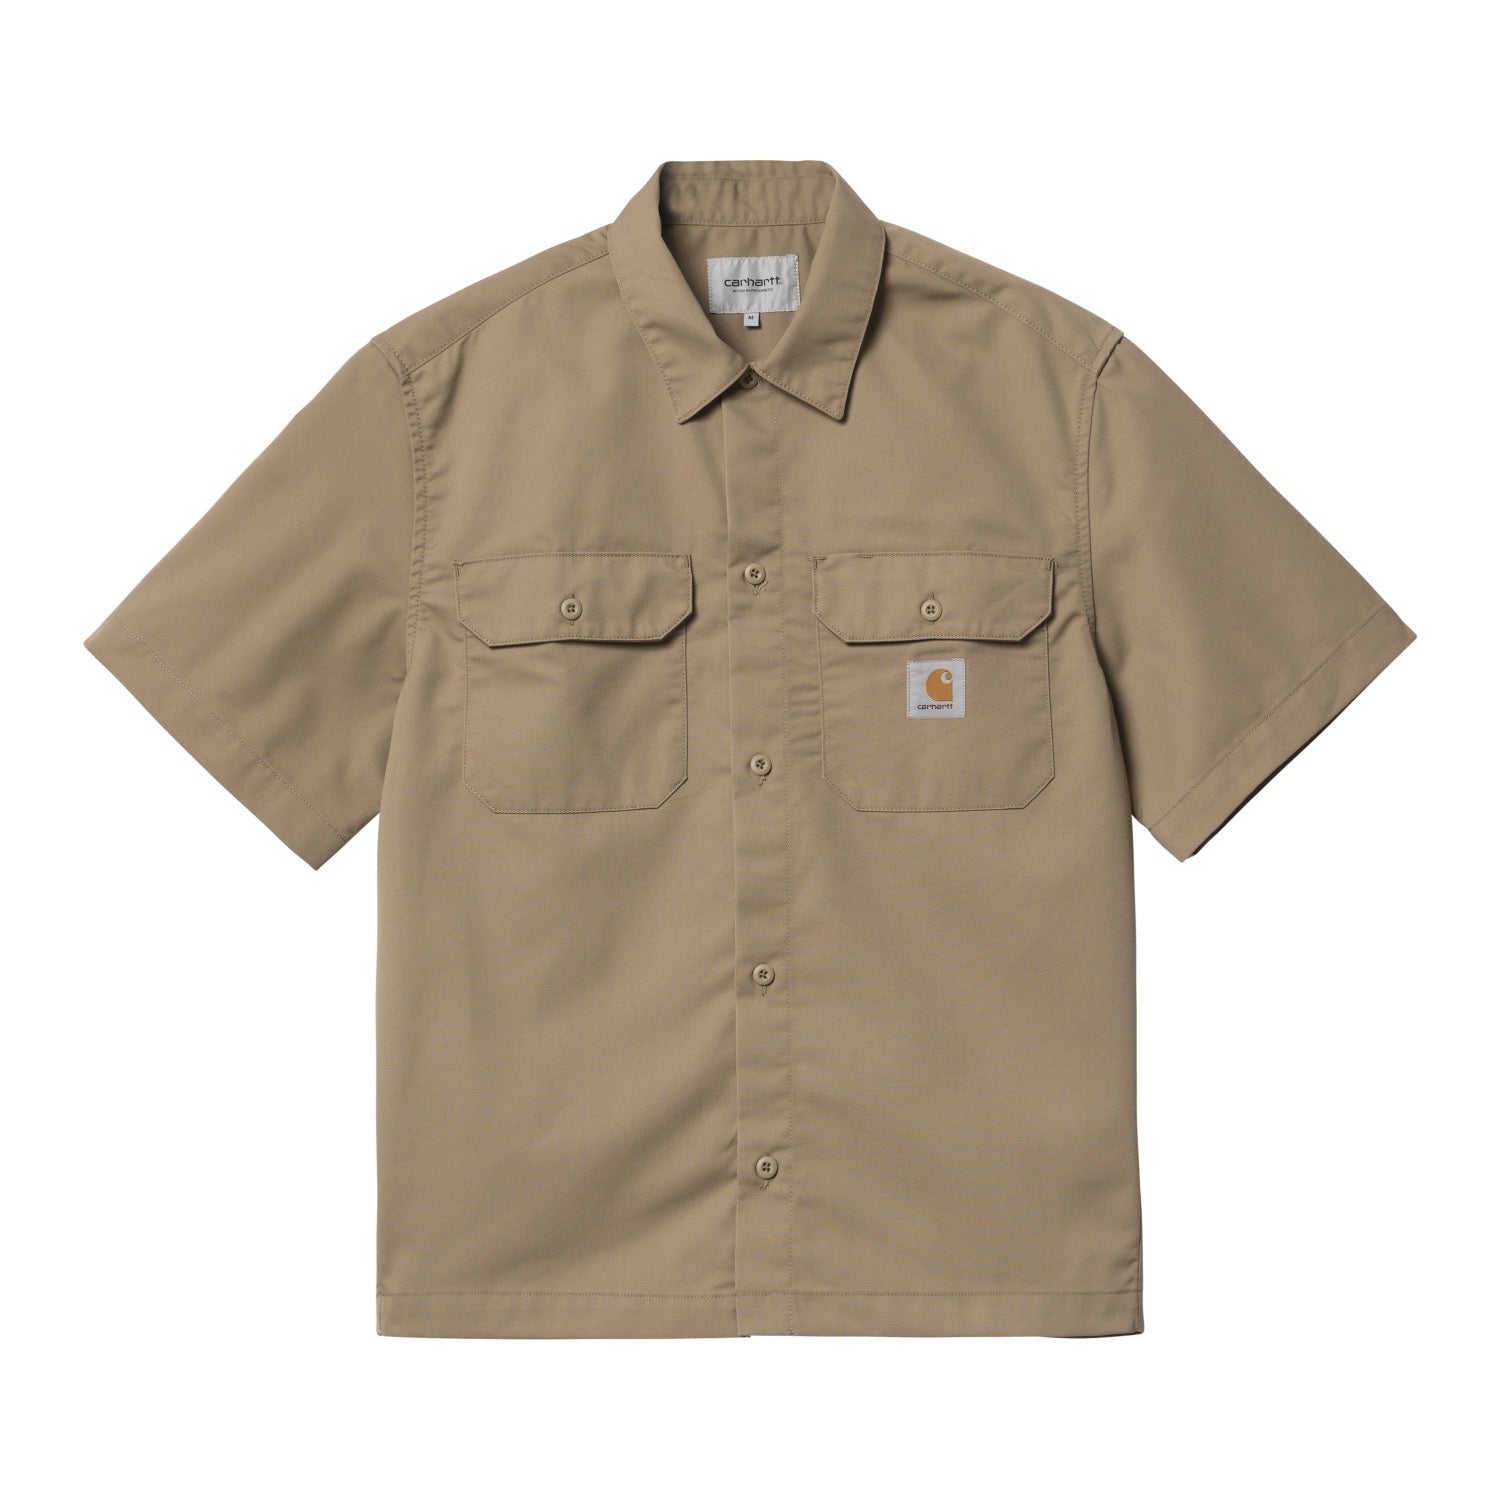 Carhartt 104616 Short-Sleeve Force Relaxed Fit Midweight Pocket T